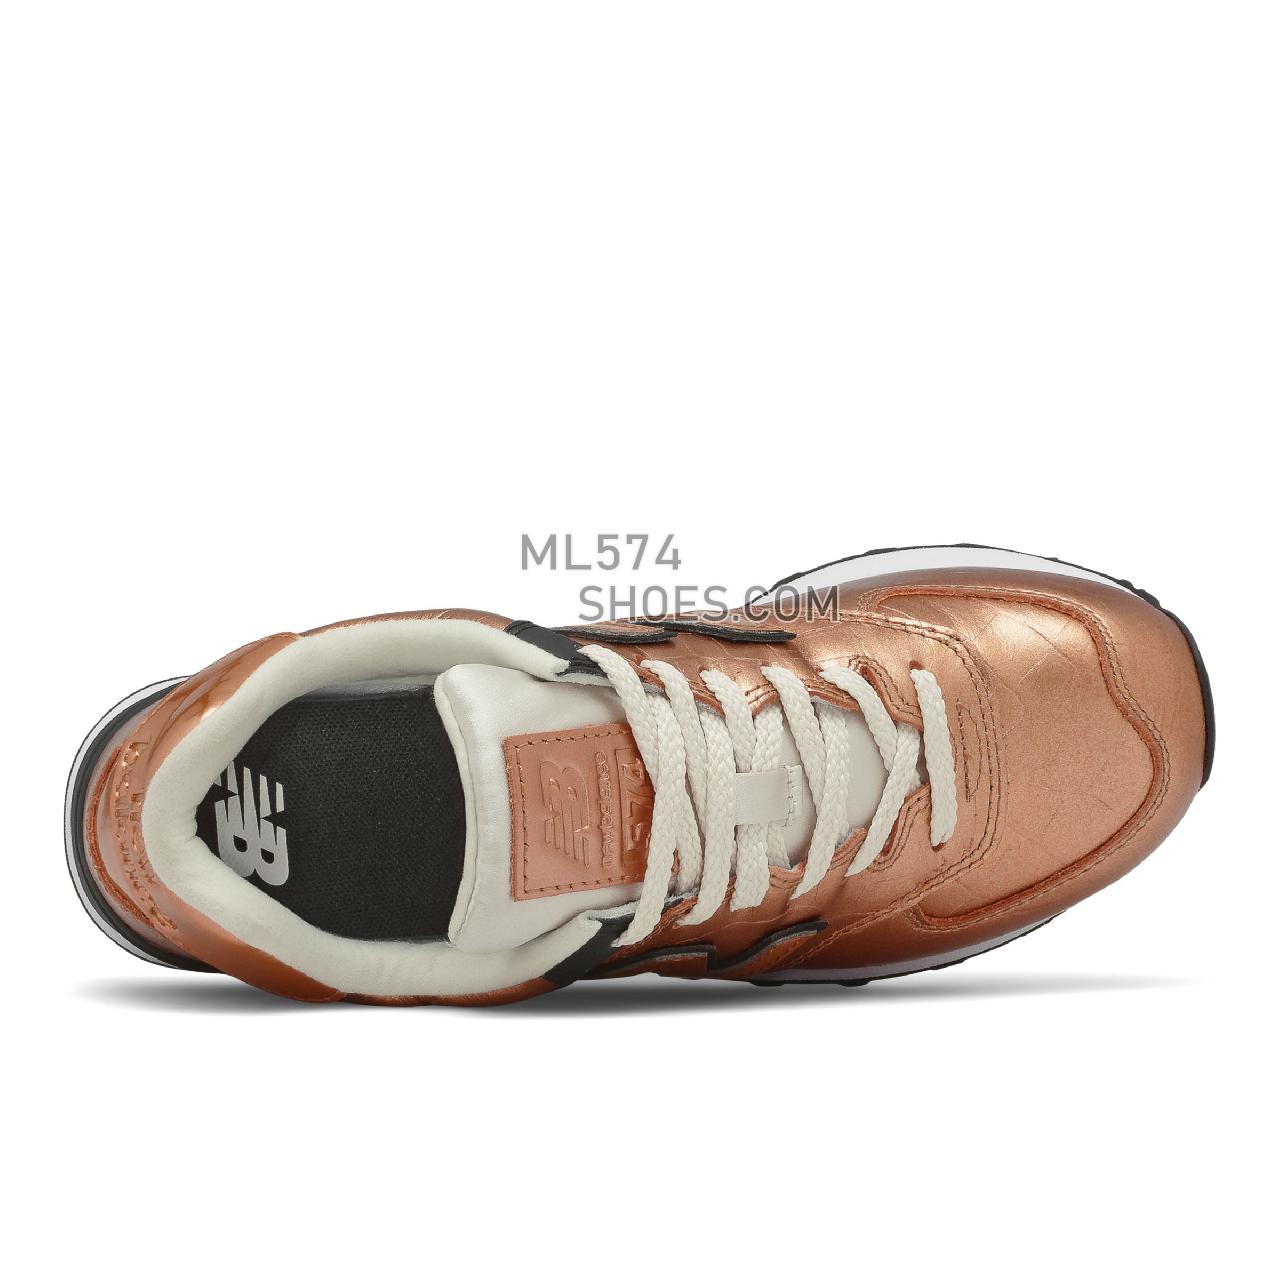 New Balance 574 - Women's Classic Sneakers - Bronze with Black - WL574PX2